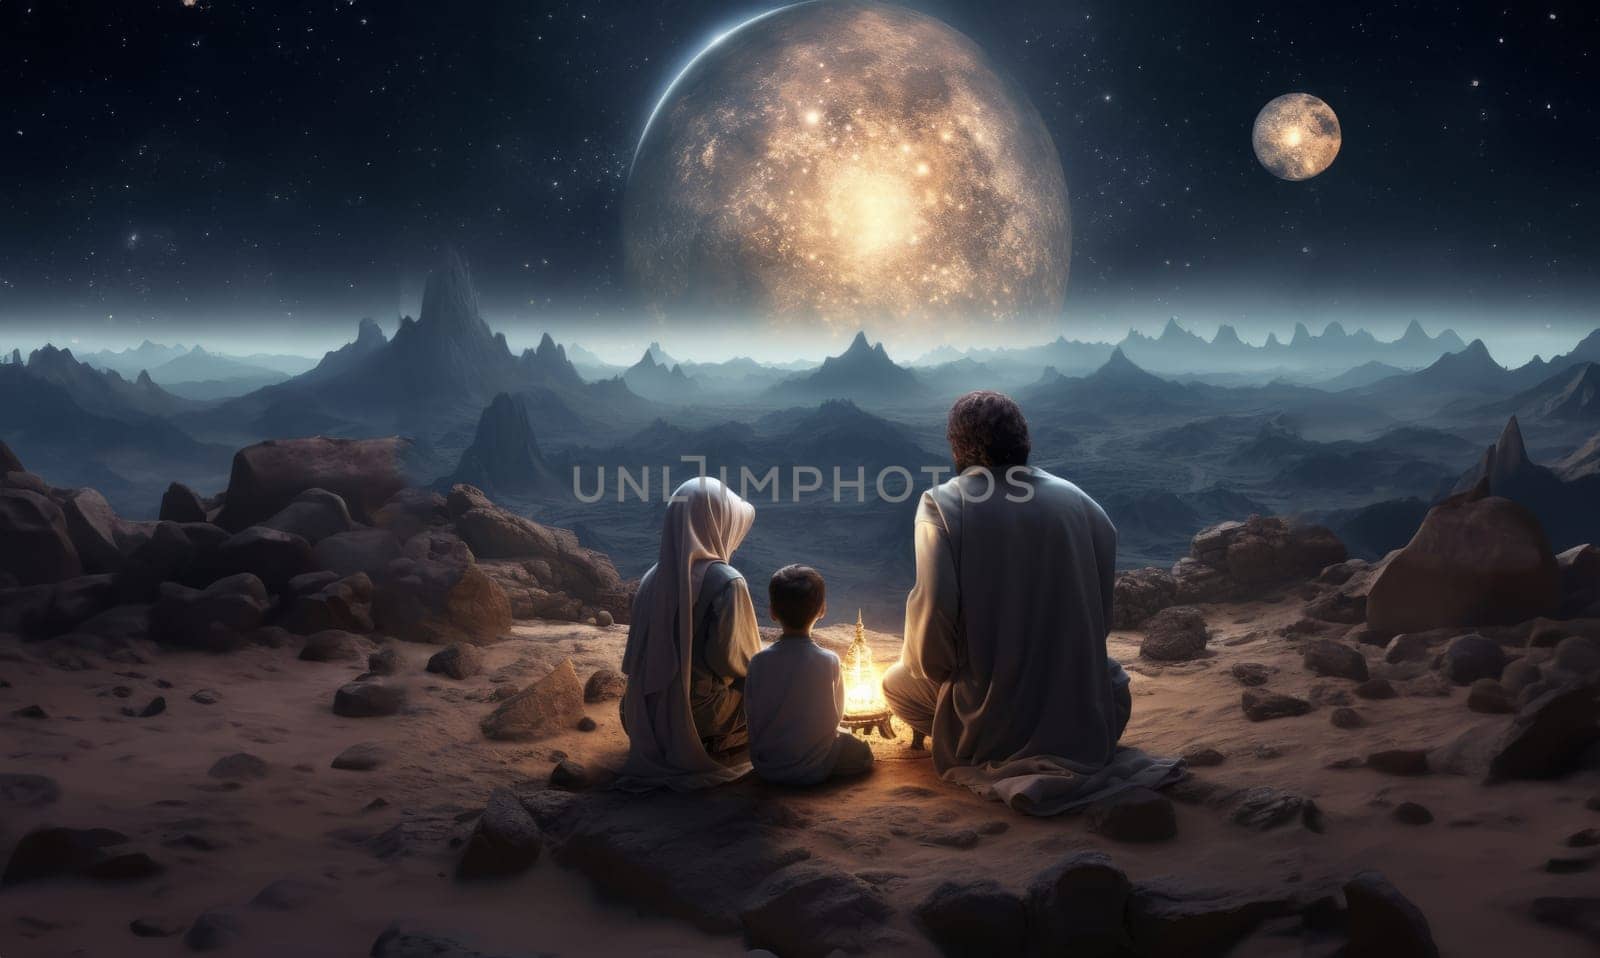 A Muslim family in the ancient mountains of the Sahara gathers to welcome the breaking of the fast at iftar during Ramadan, embodying traditions of unity, compassion, and gratitude in a serene and sacred setting.Generated image.